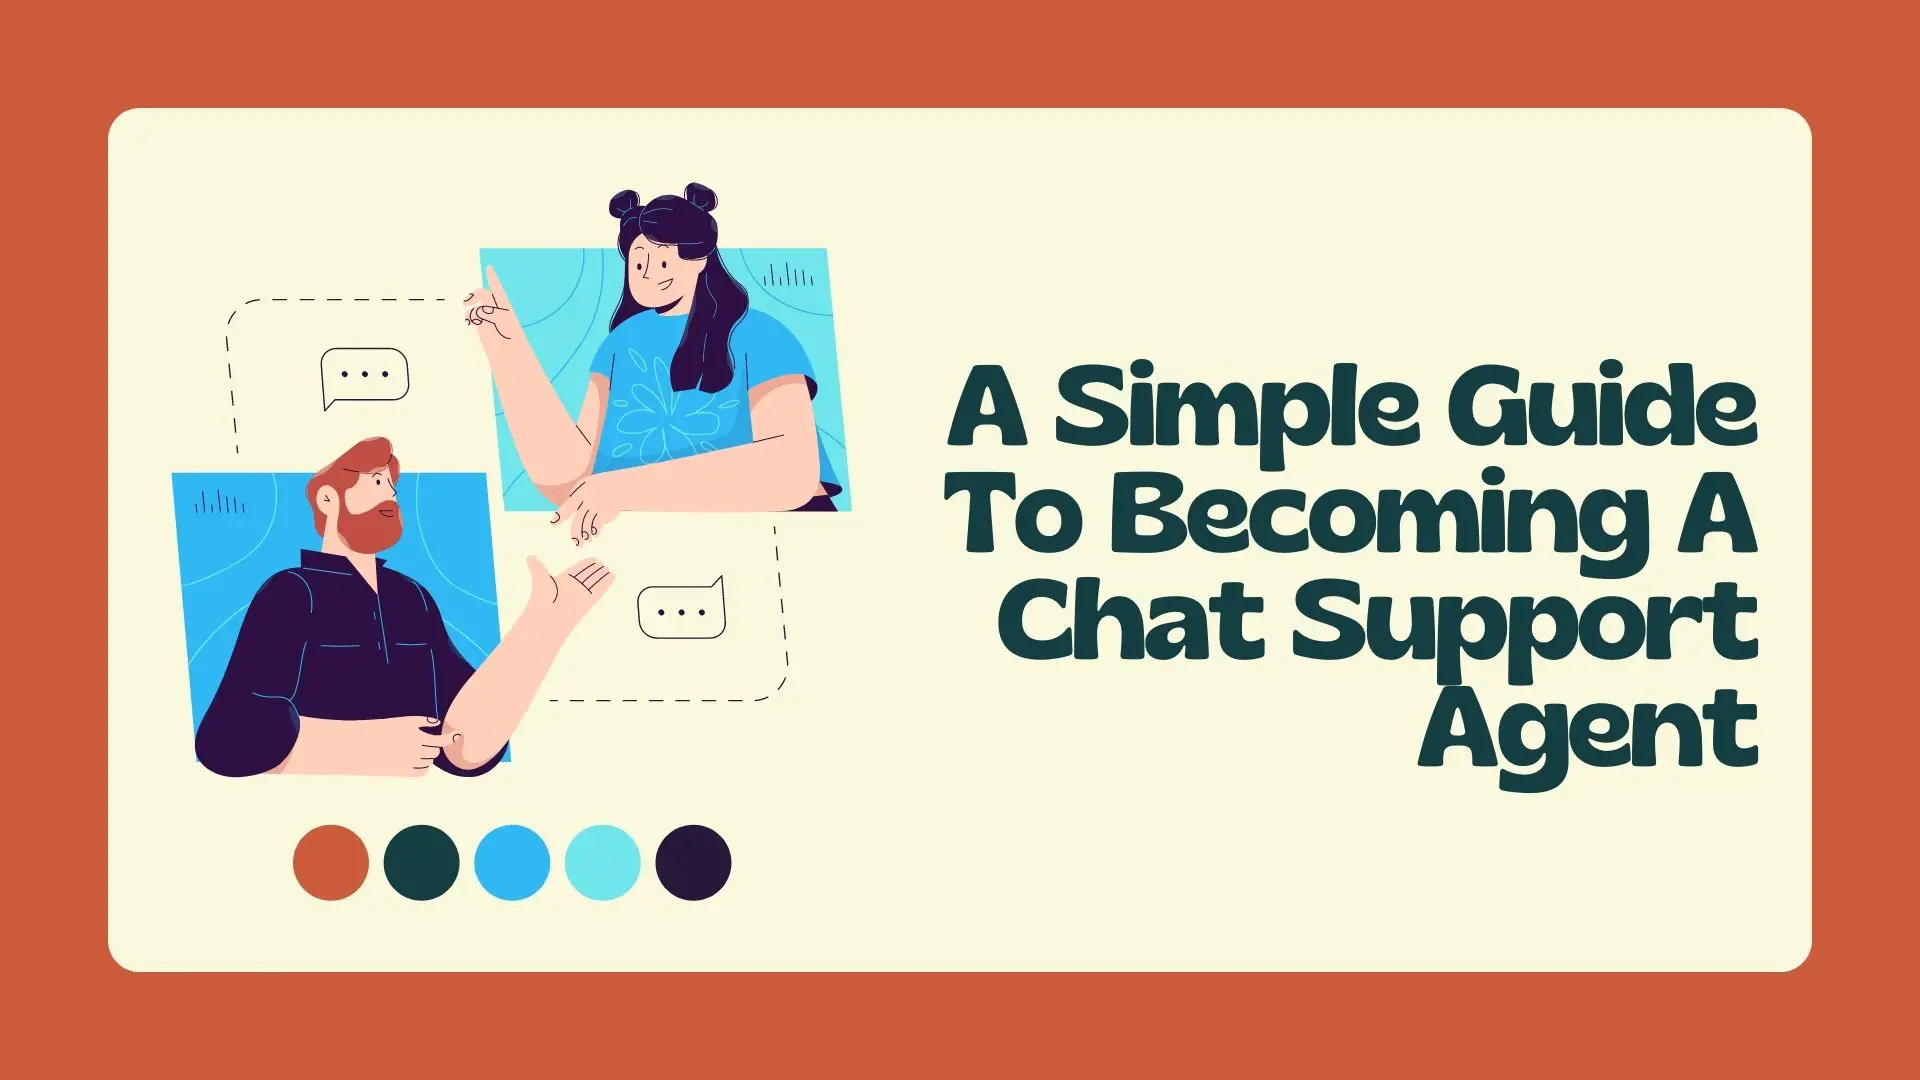 A Simple Guide To Becoming A Chat Support Agent